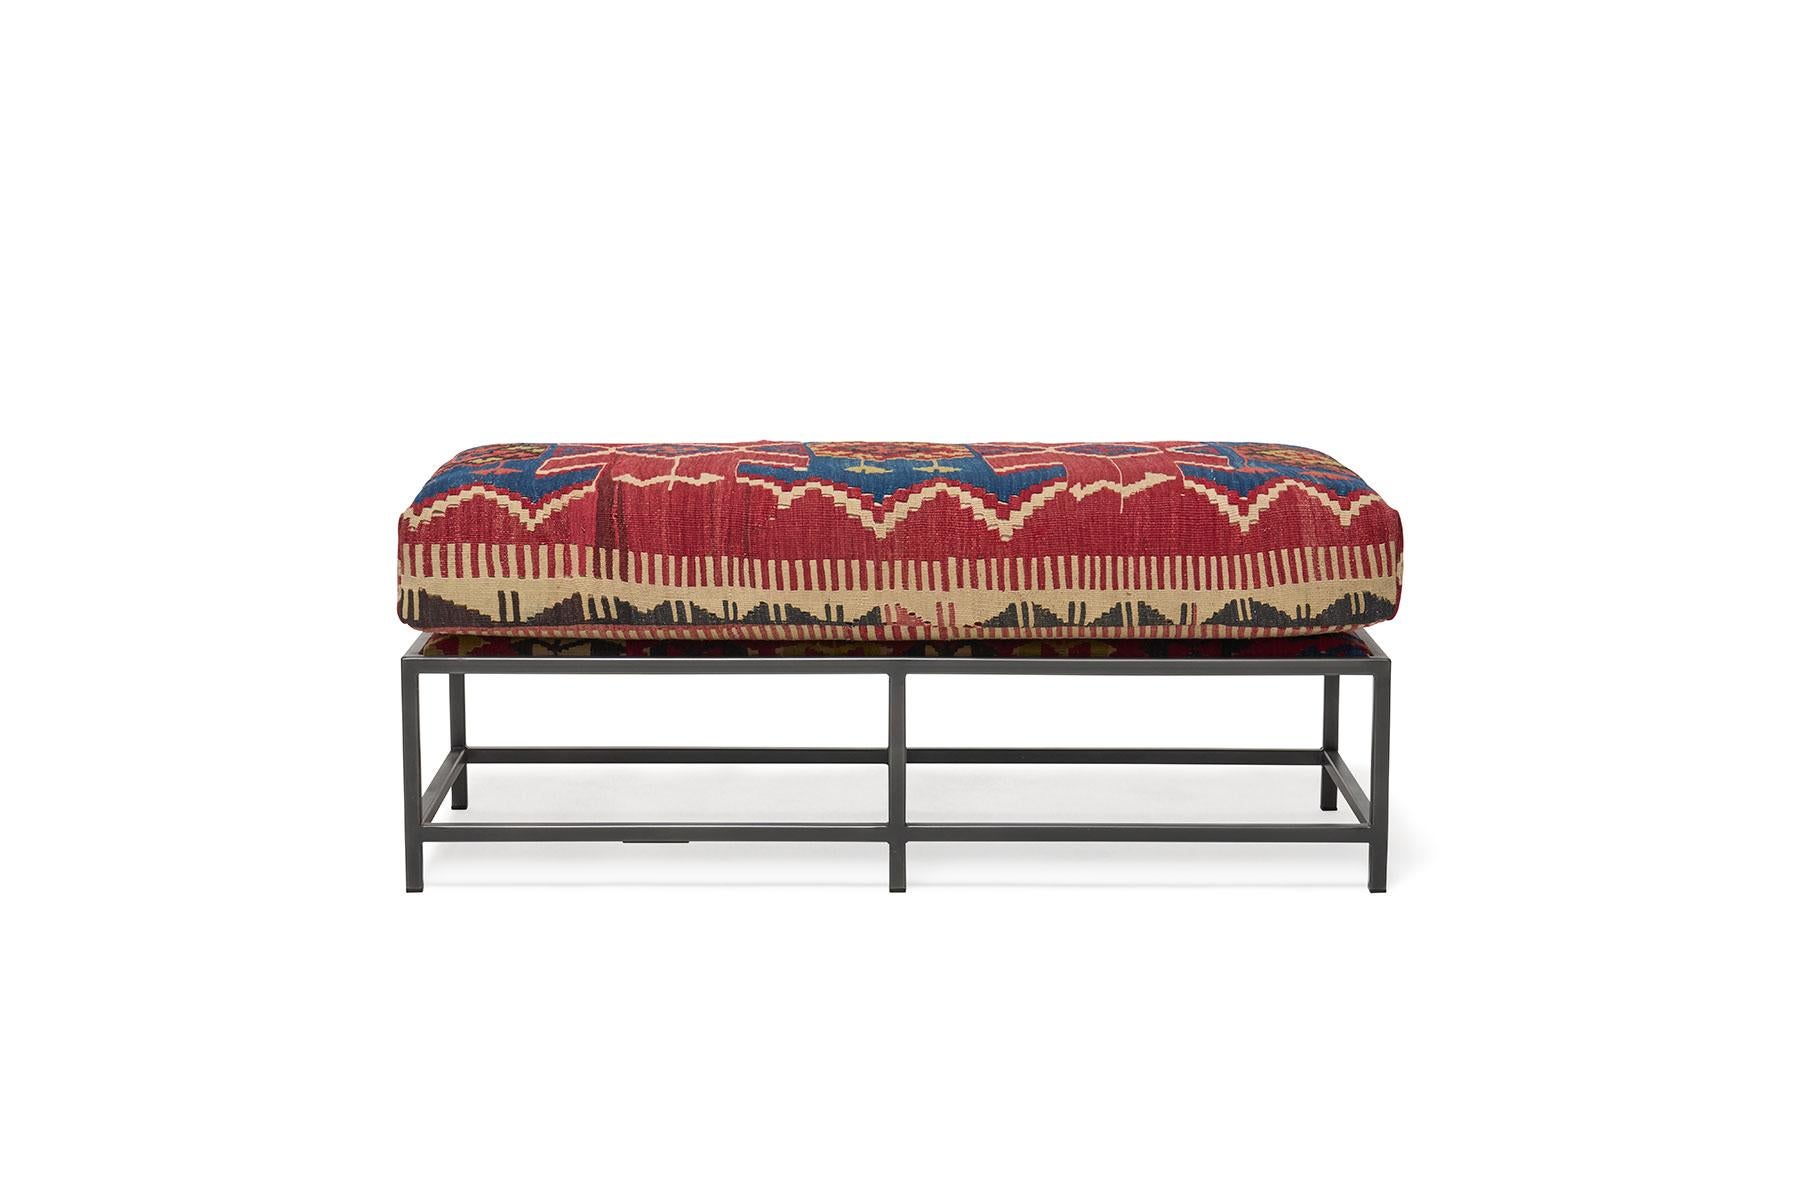 This bench, in the style of Stephen's Kenn Inheritance Collection, has been upholstered with an antique rug from the collection of King Kennedy rugs. The textile has been lovingly repaired and reinforced, without losing any of the beautiful